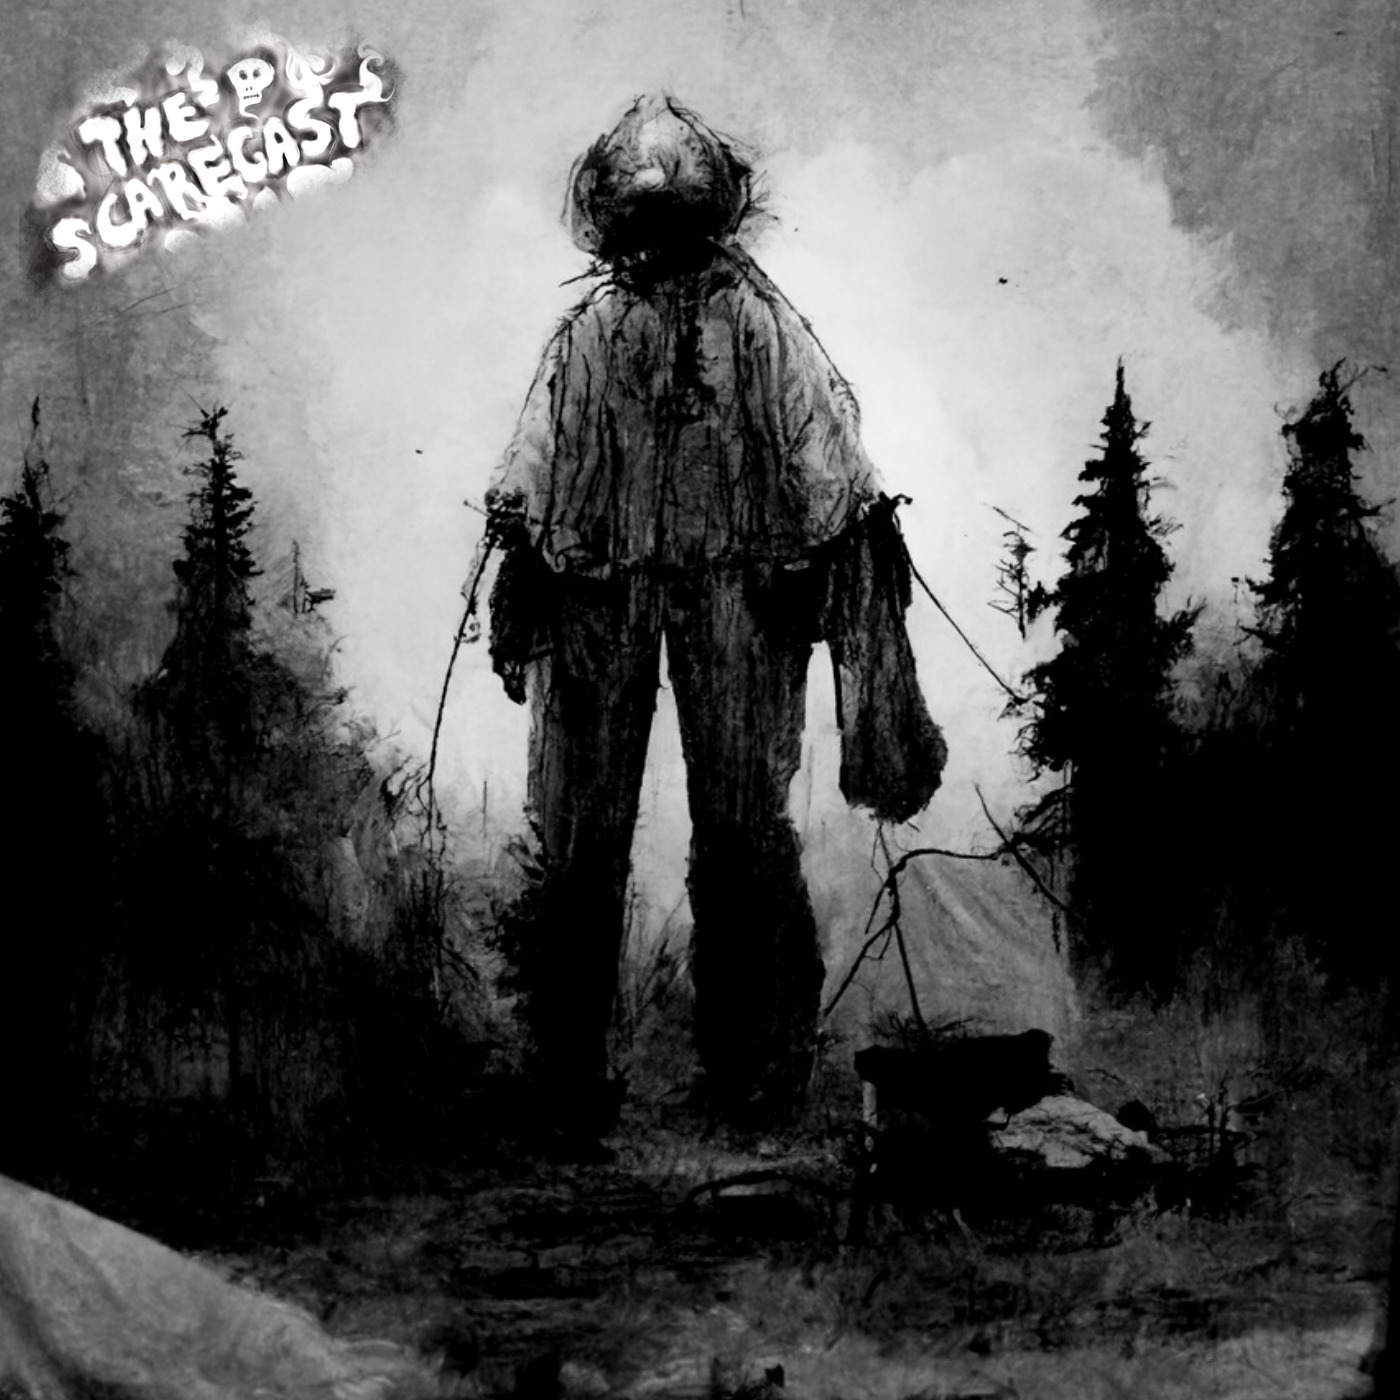 S7E7 - 3 Scary Stories: The Man of the Woods